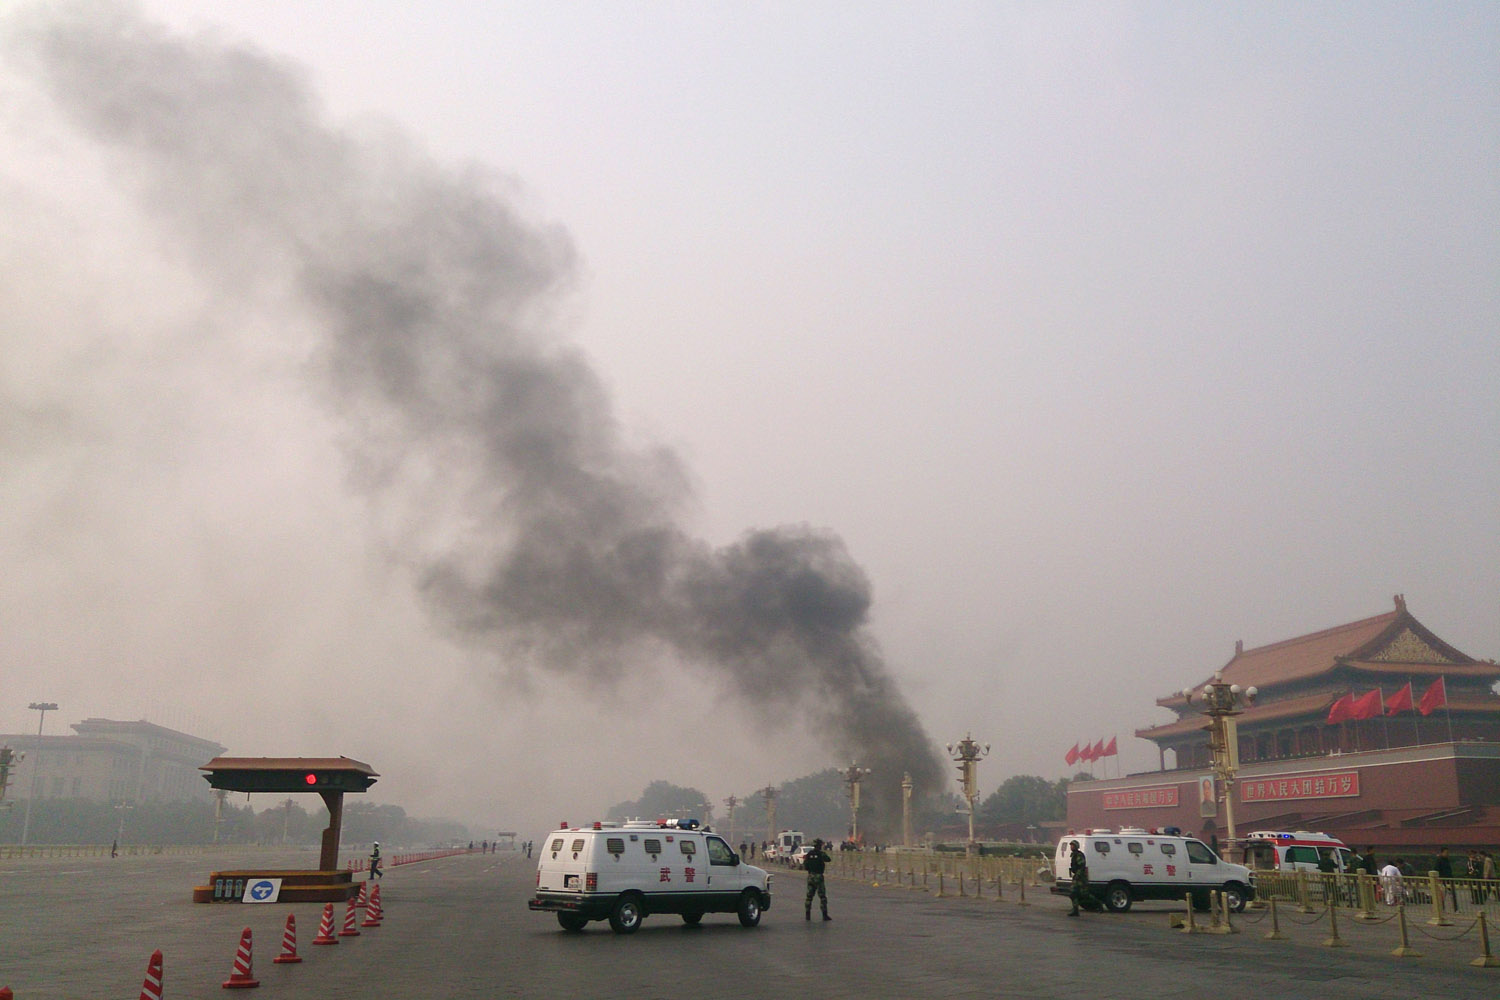 Oct. 28, 2013. Police cars block off the roads leading into Tiananmen Square as smoke rises into the air after a vehicle crashed, killing three people, in front of Tiananmen Gate in Beijing, China.